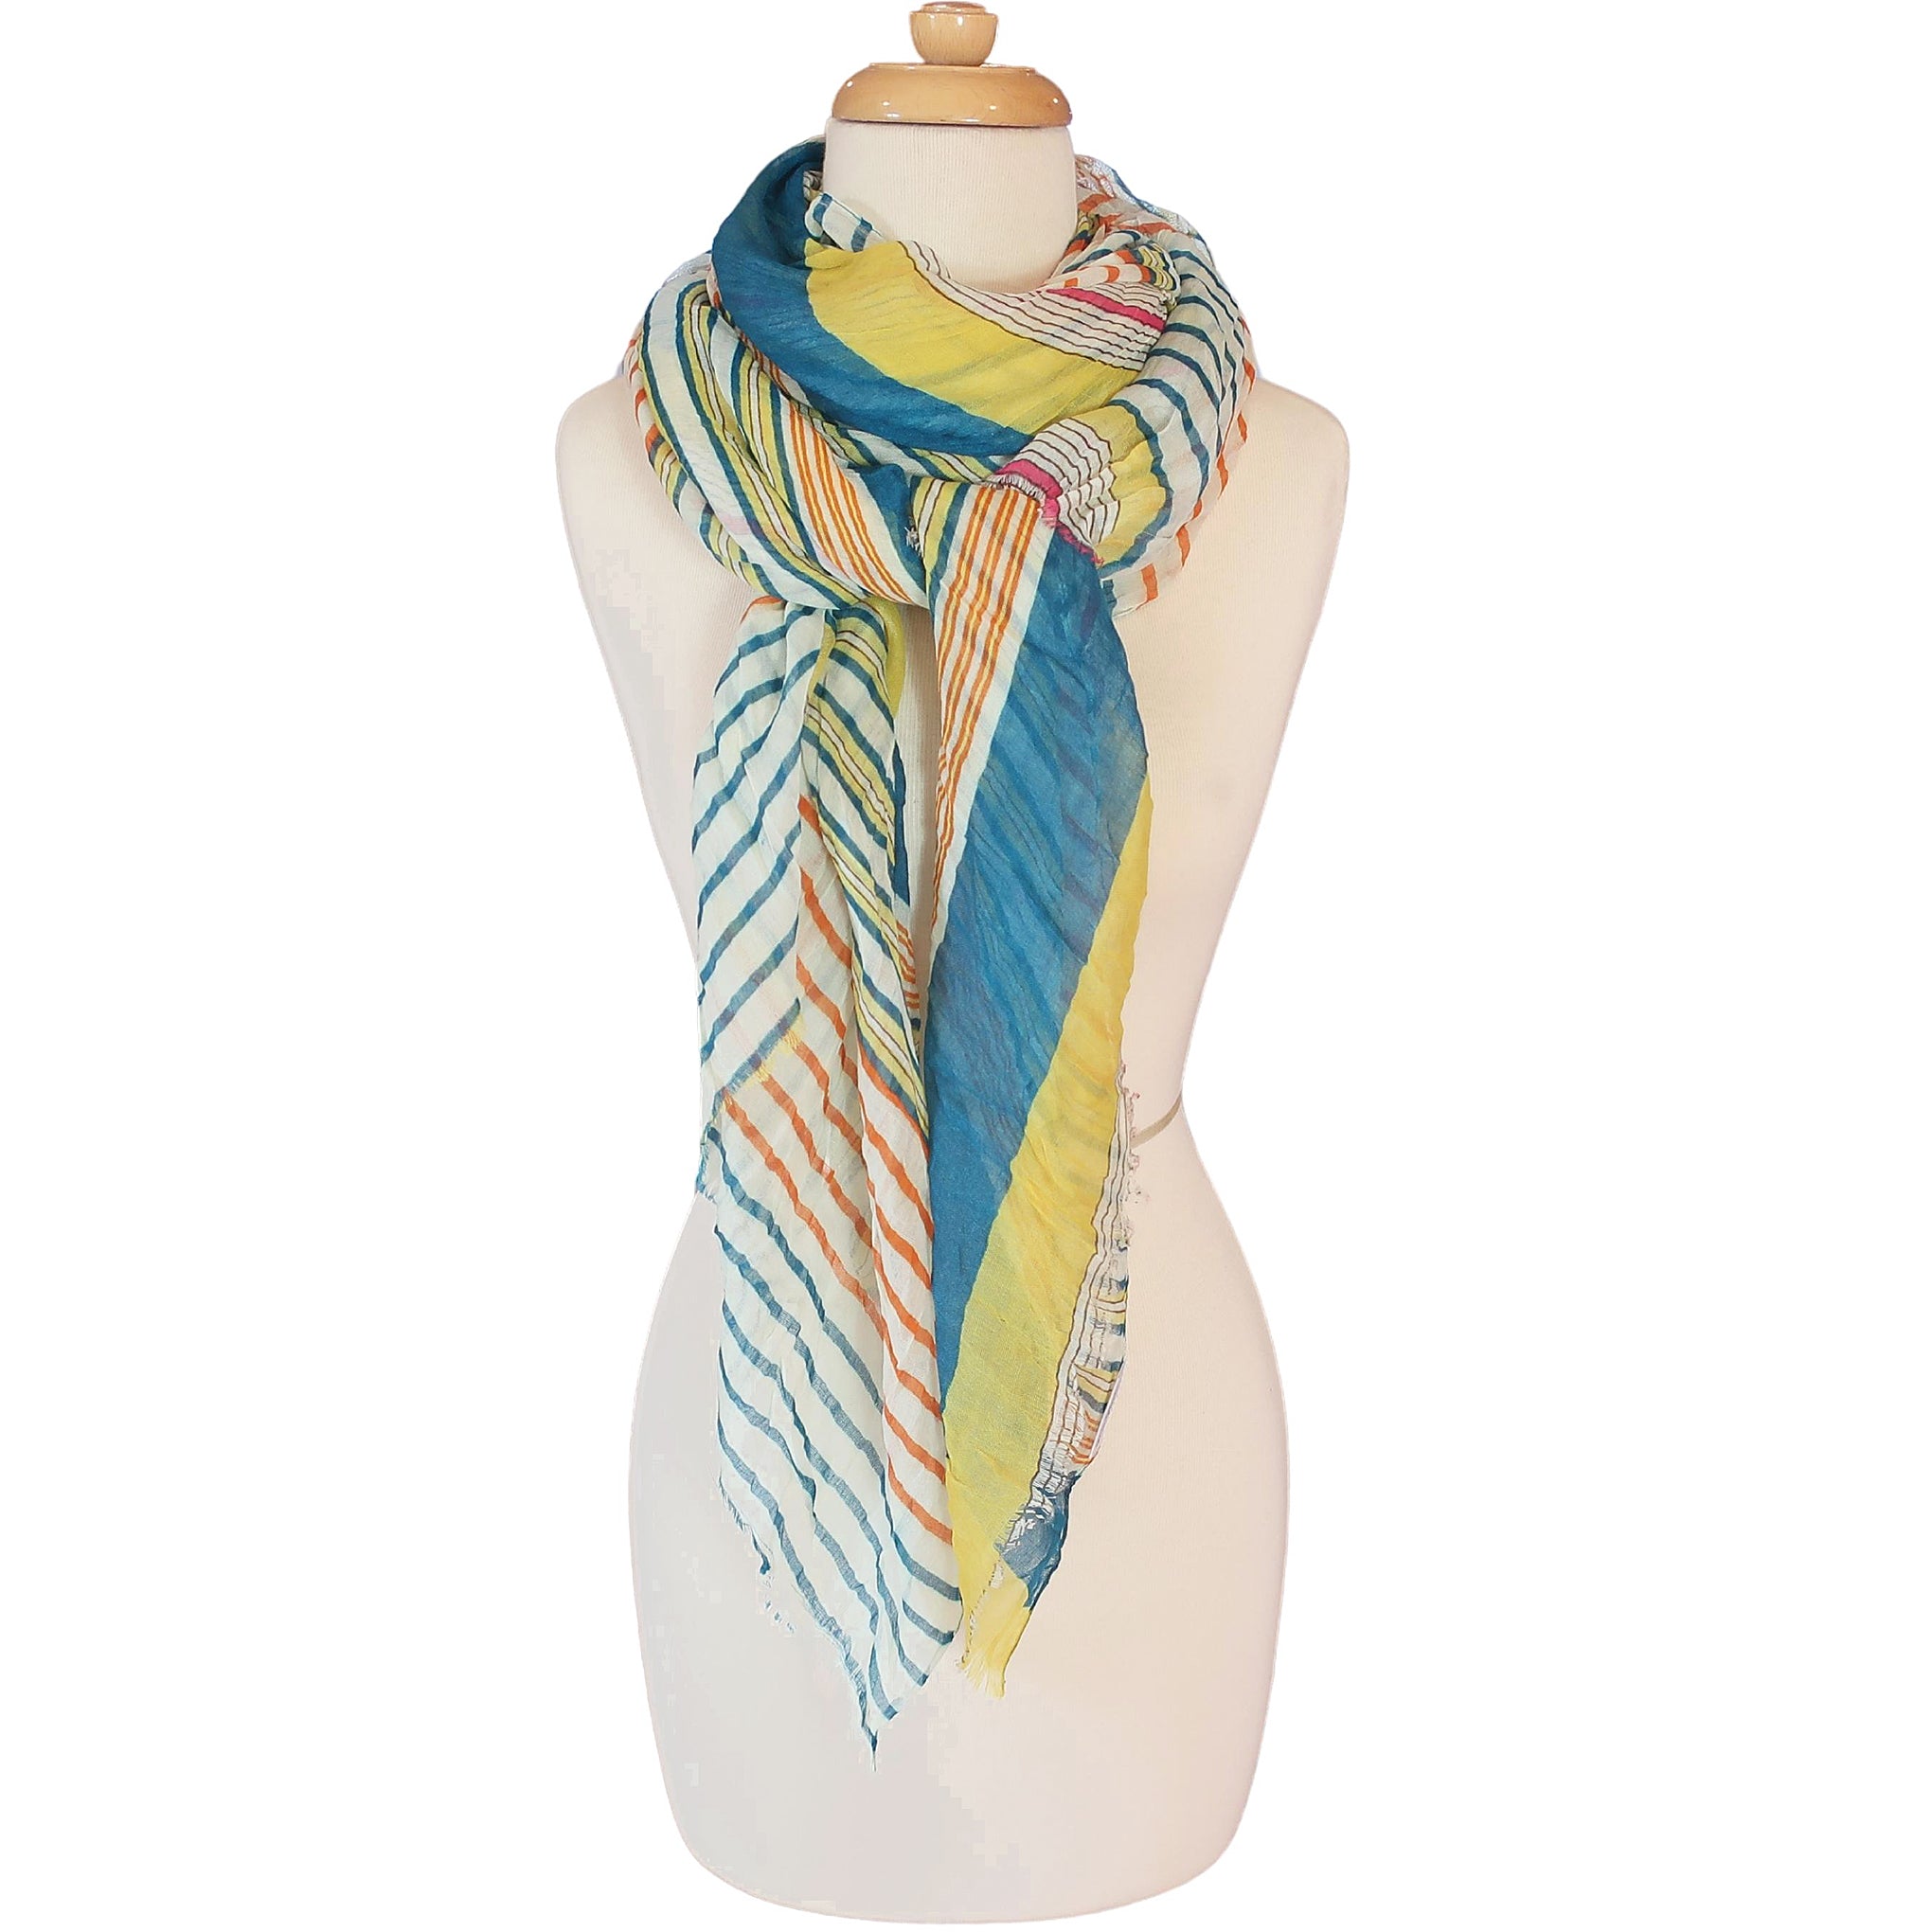 Blue Pacific Cotton Starburst Striped Scarf in Teal Blue and Yellow